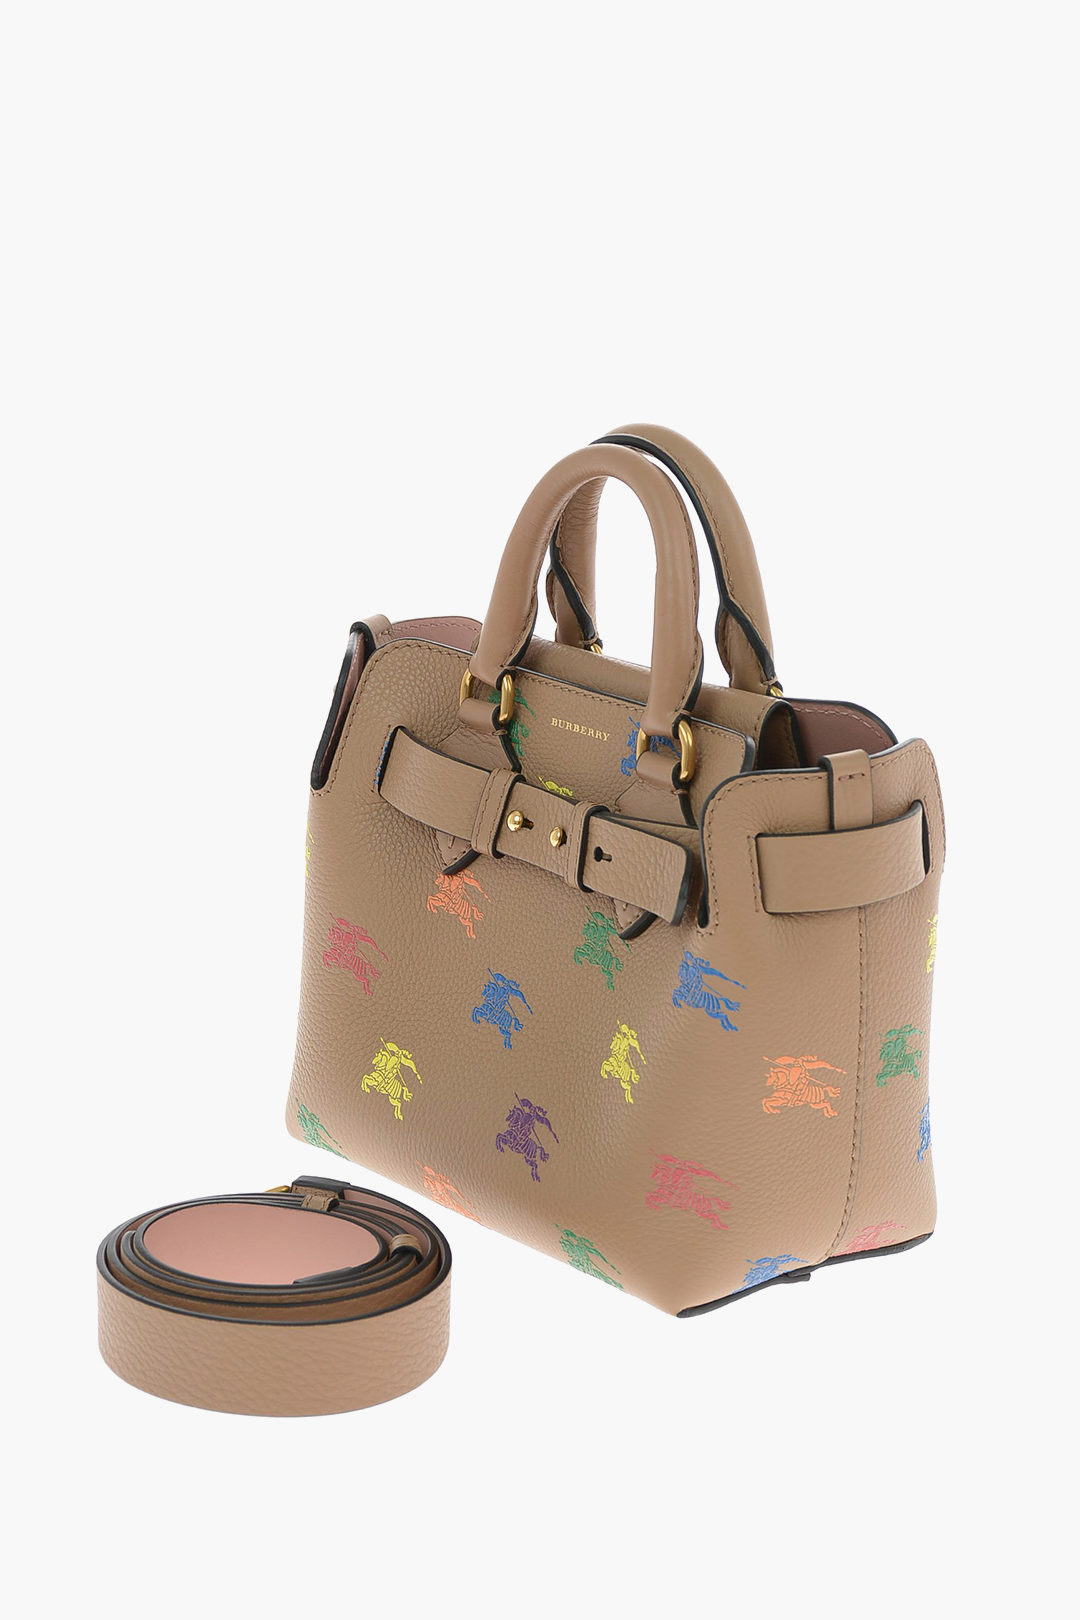 Burberry Horse Rainbow Baby Belt Printed Leather Tote Bag Camel